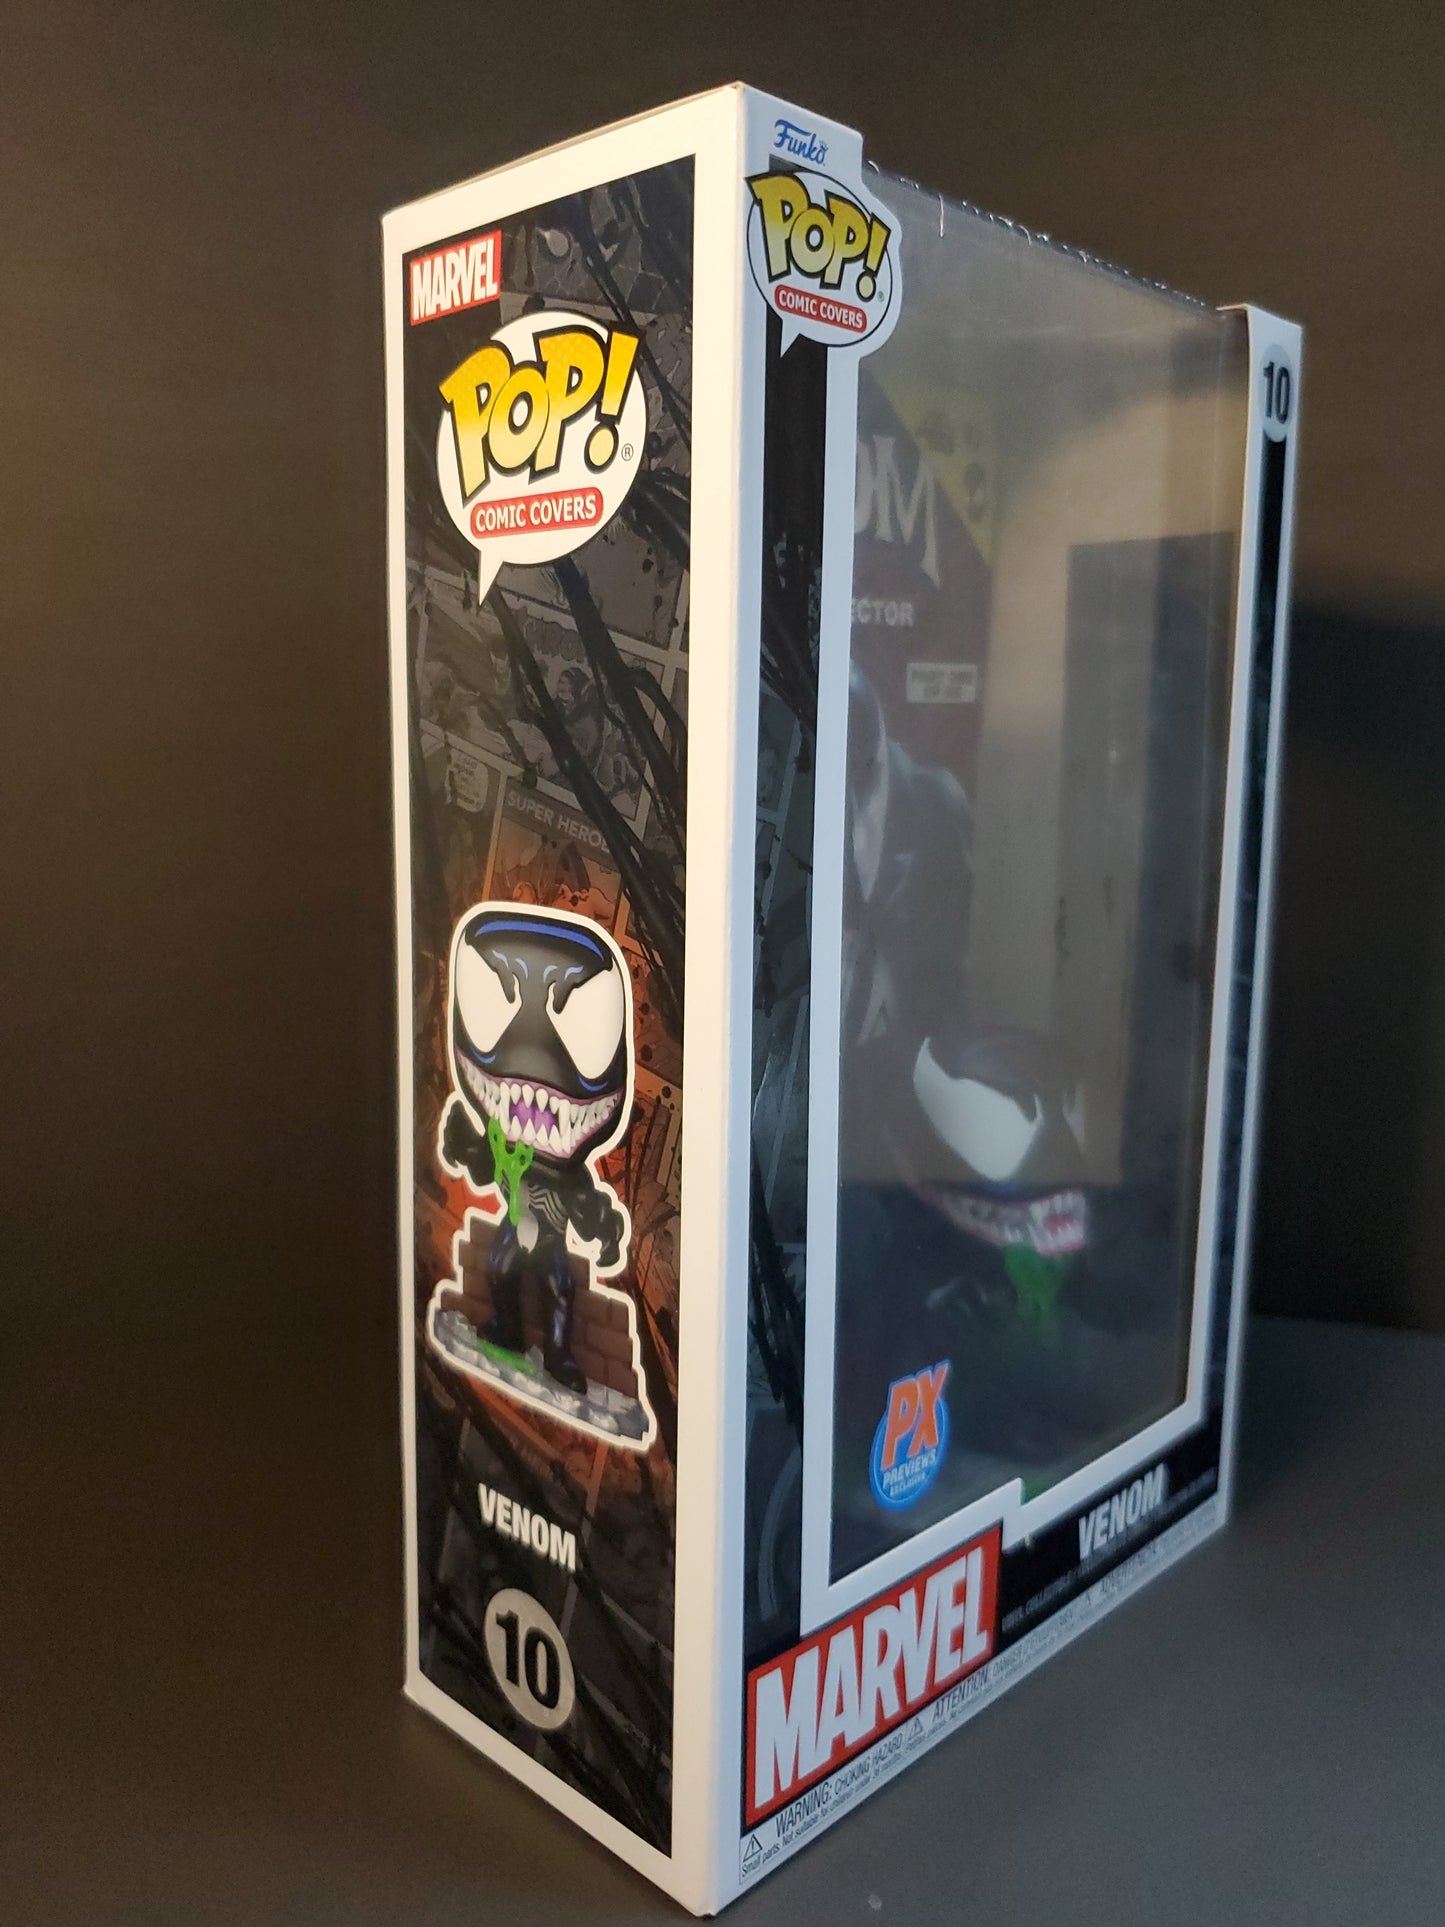 Marvel Venom 10 Lethal Protector Funko Pop Comic Cover PX Previews Exclusive